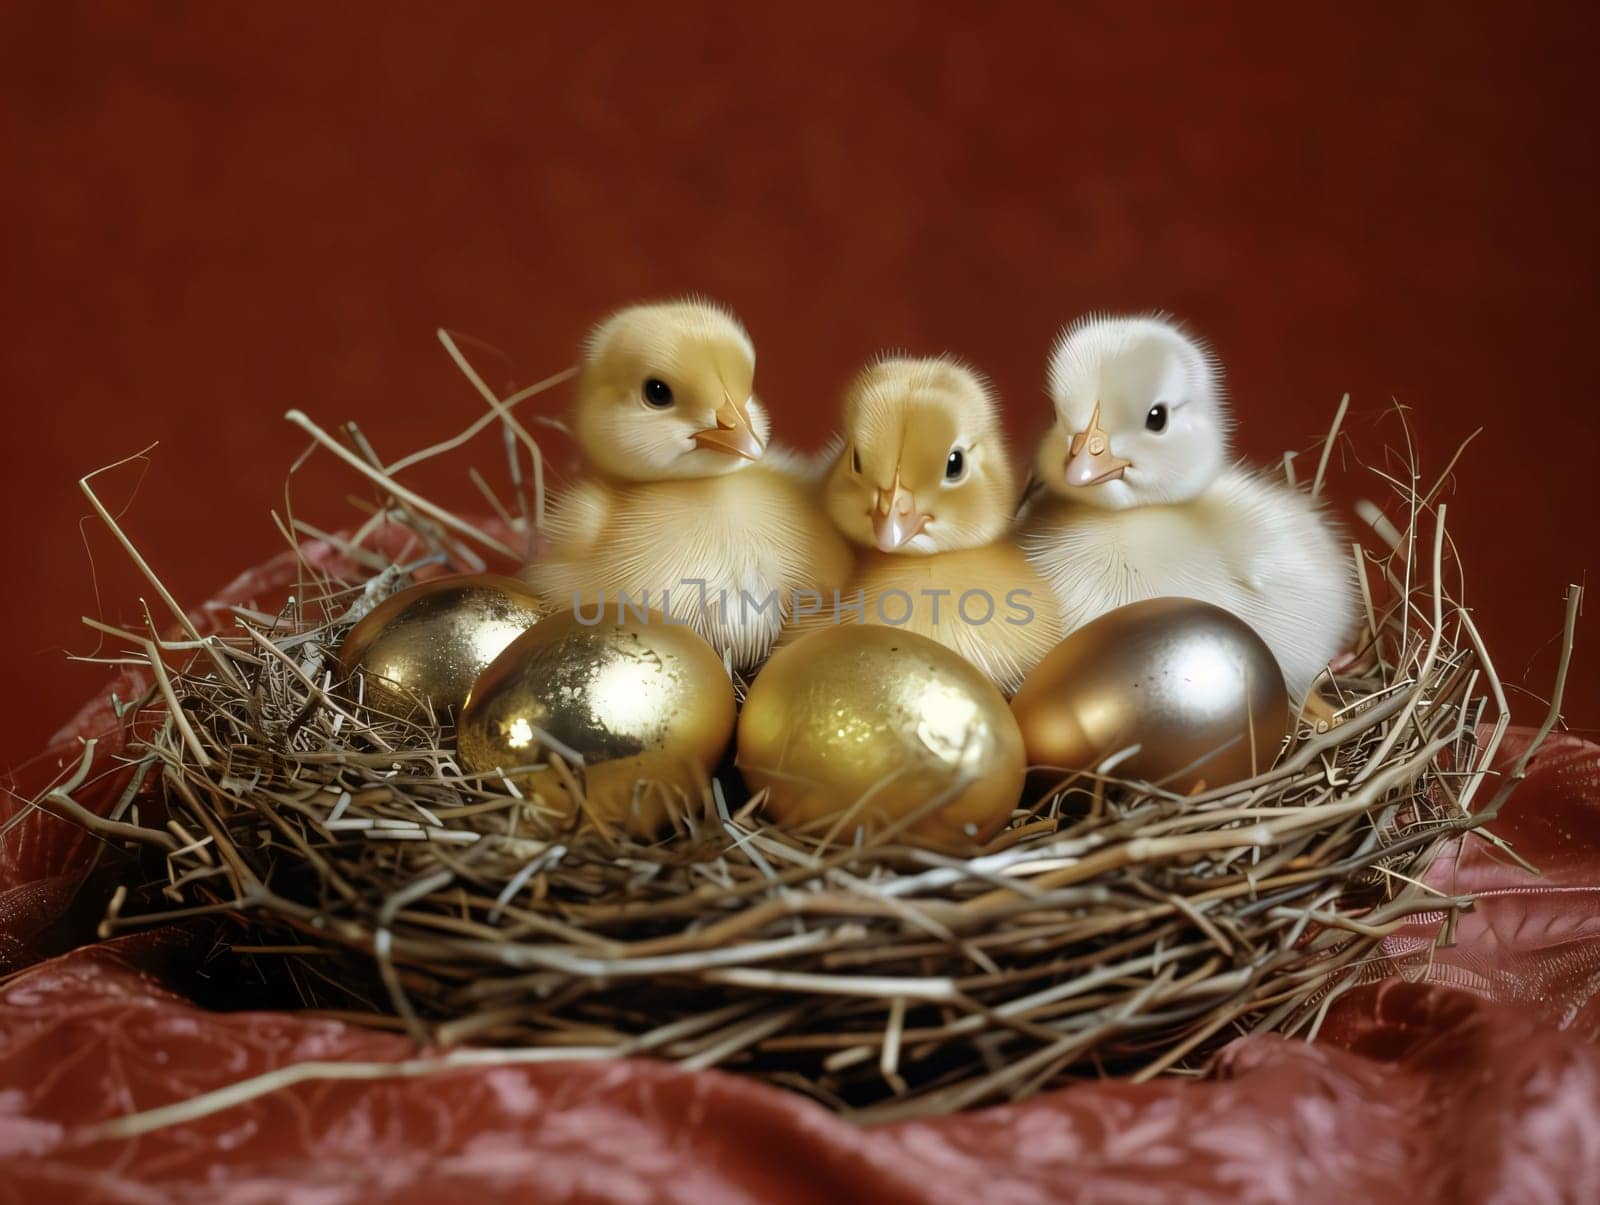 Three Ducklings With Golden Eggs in a Nest by ThemesS